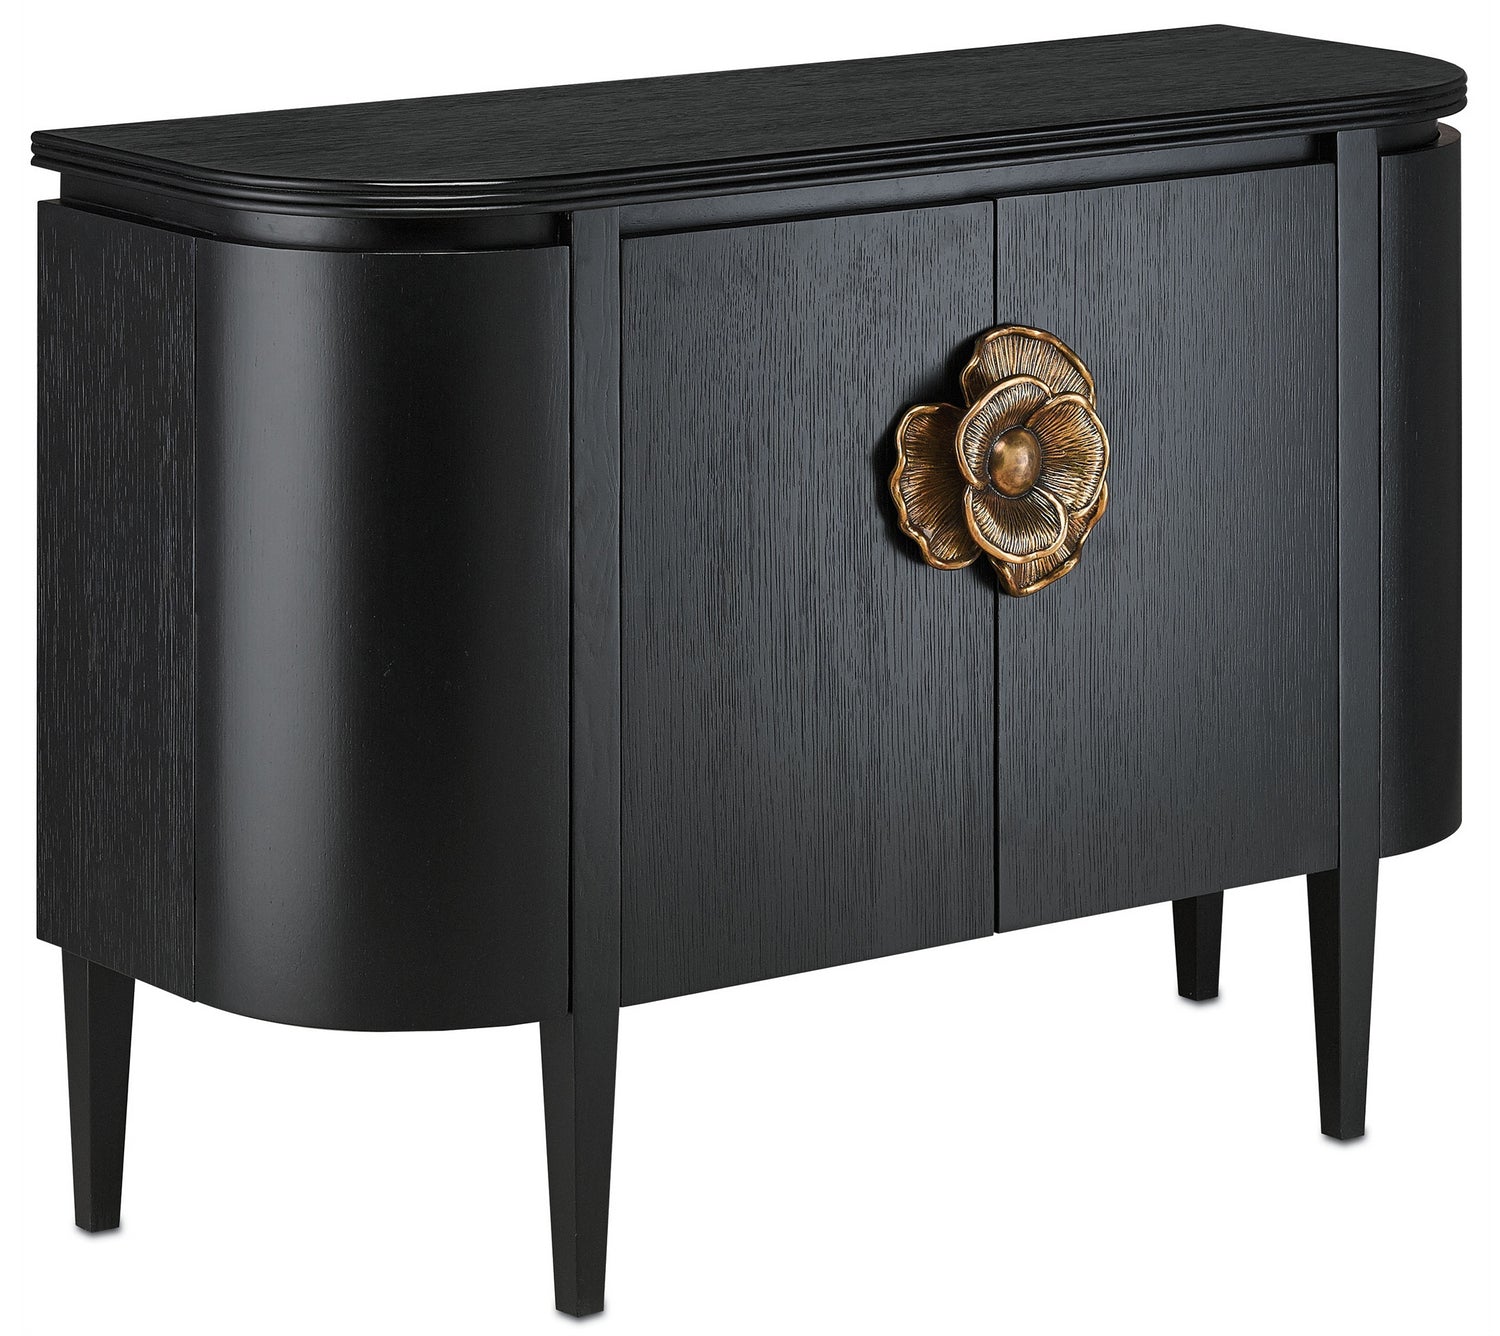 Demi-Lune from the Briallen collection in Caviar Black/Antique Brass finish